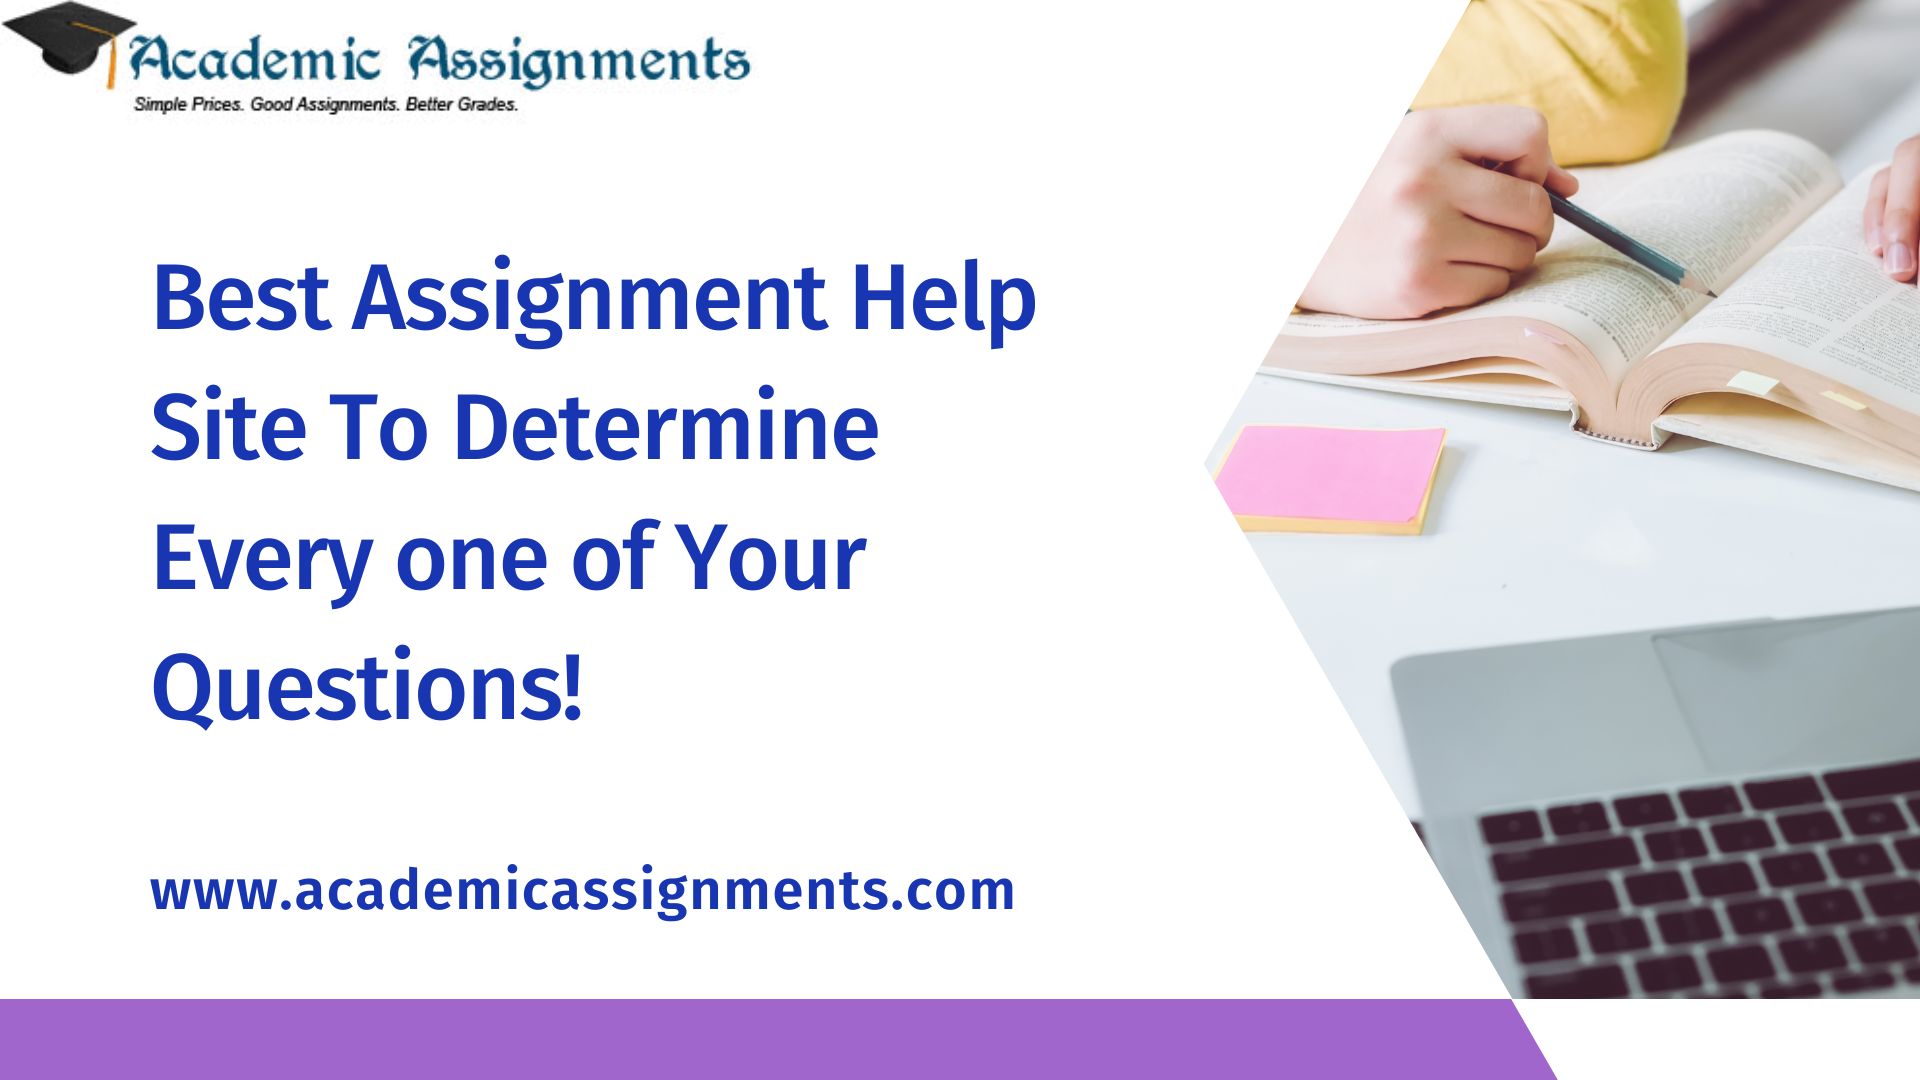 Best Assignment Help Site To Determine Every one of Your Questions